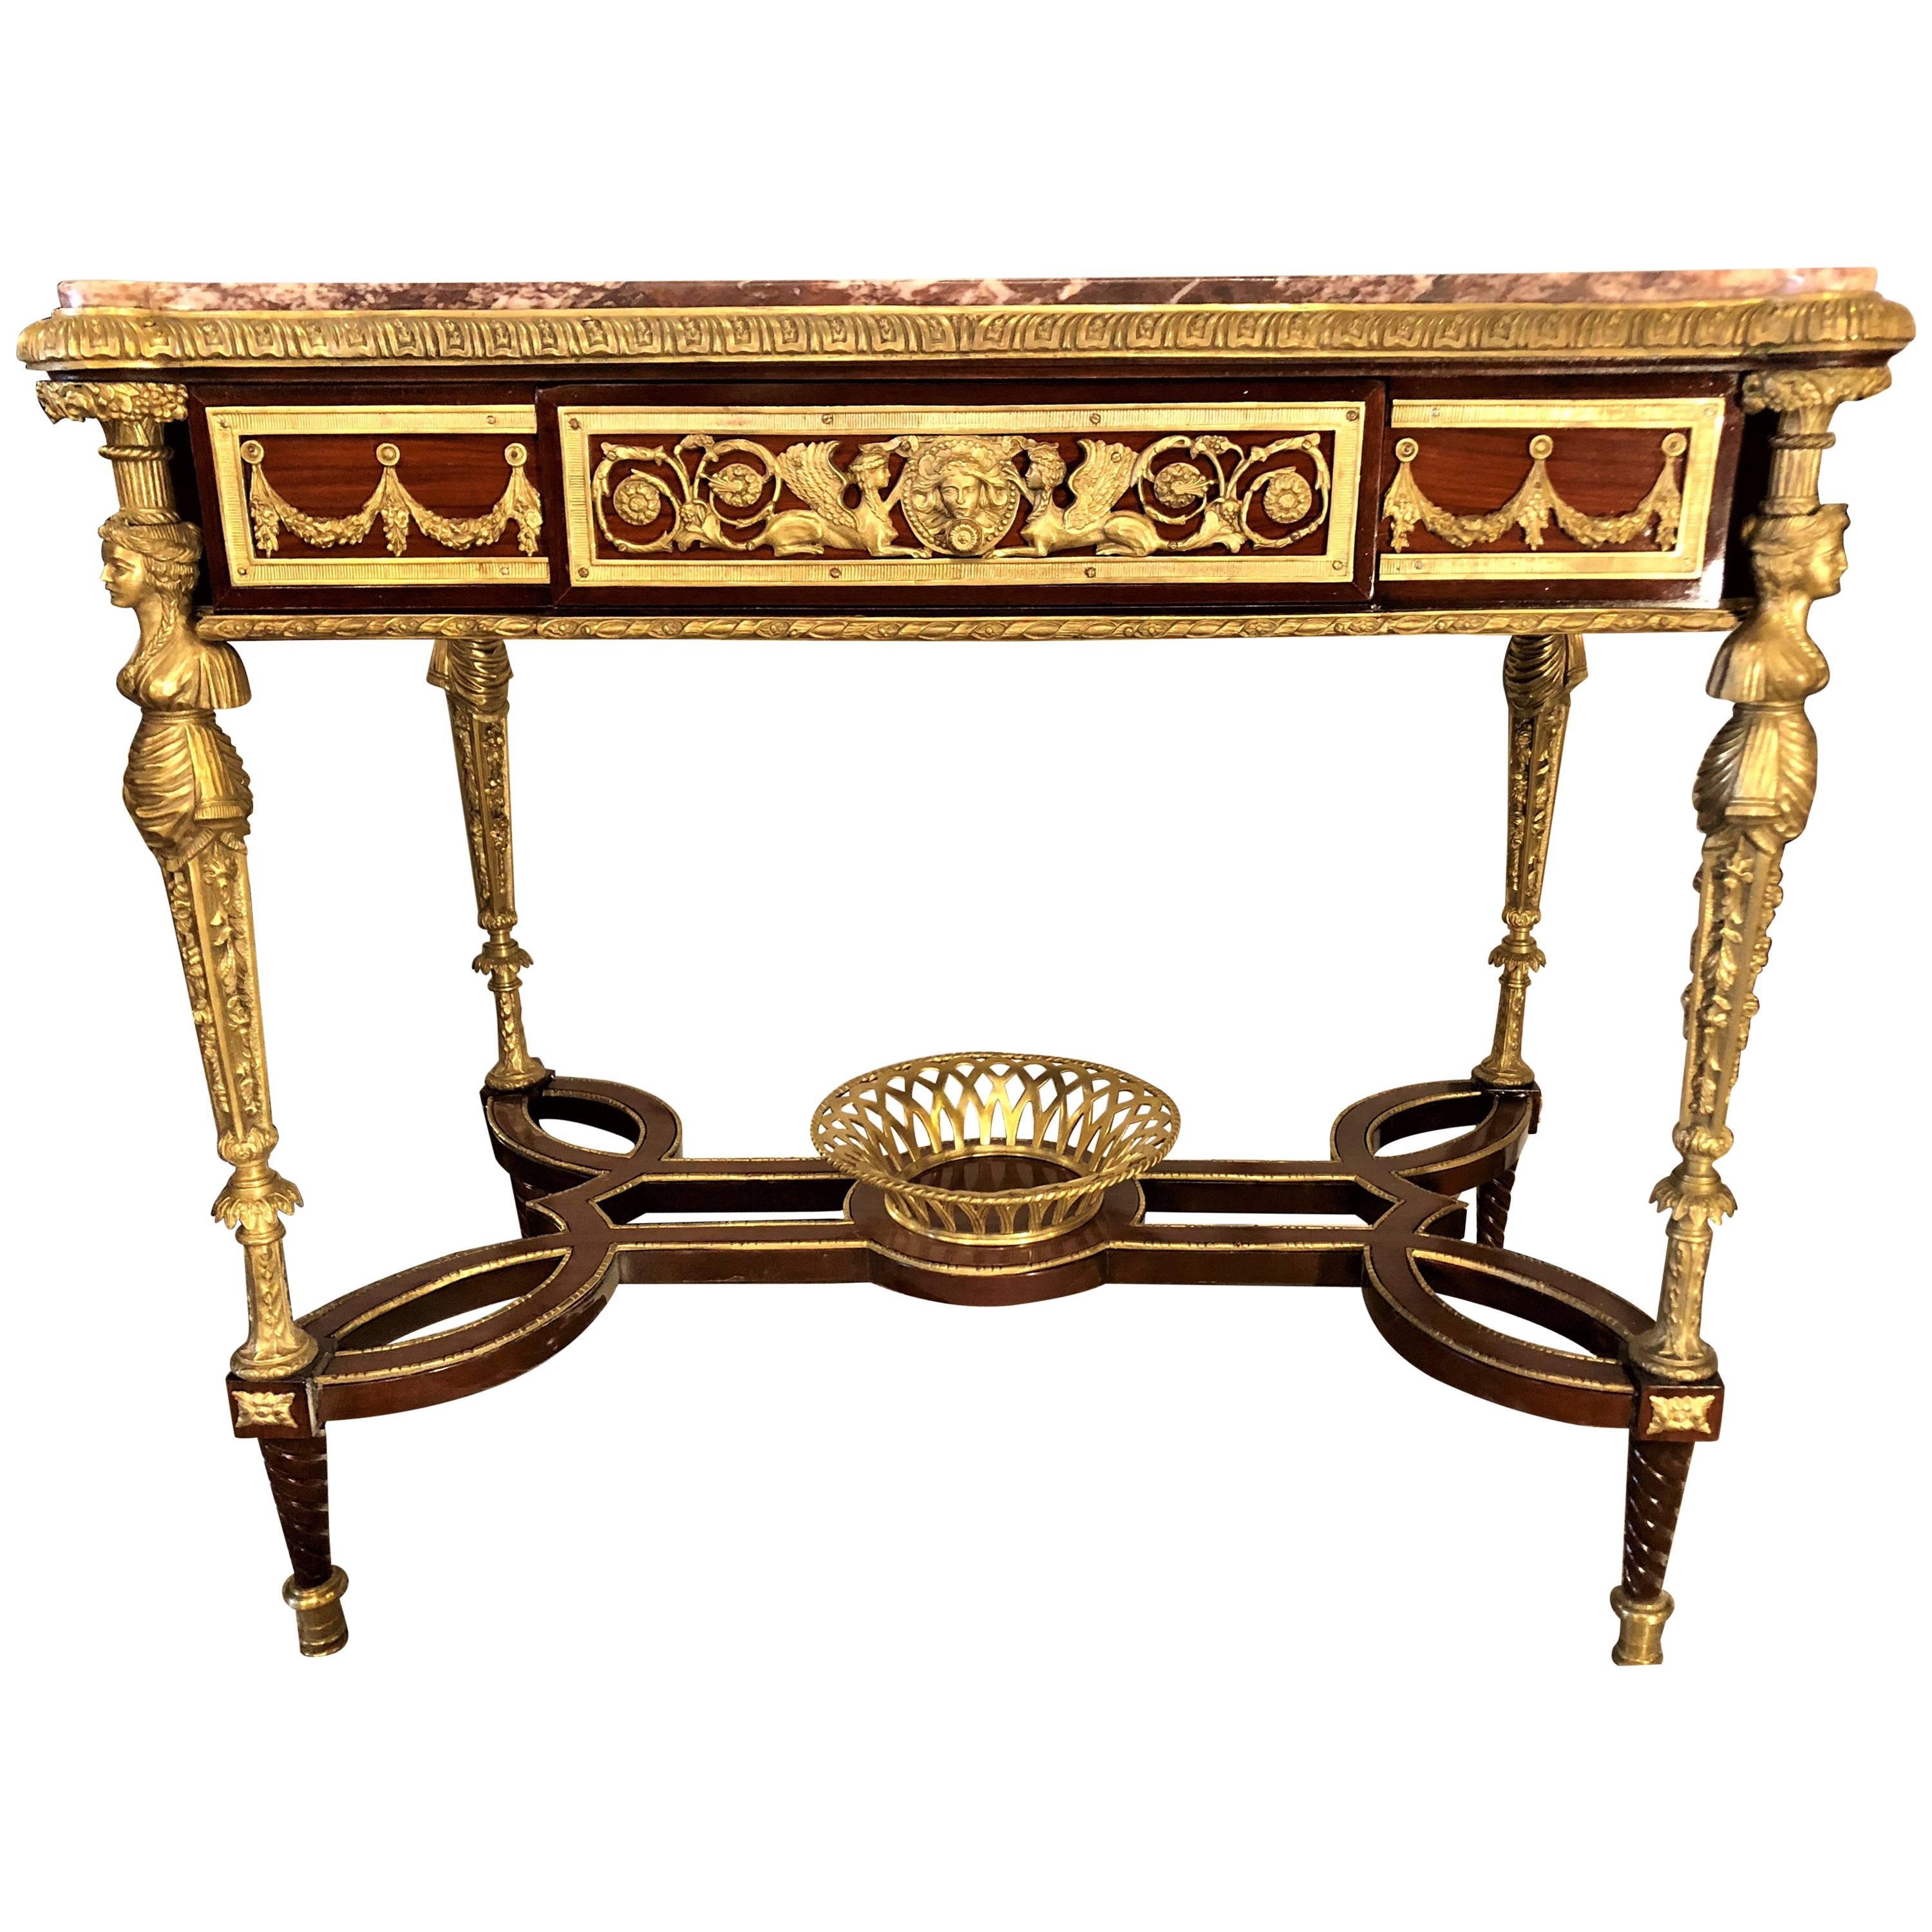 Adam Weisweiler Style Center Table or Desk Depicting Four Full Bodied Woman